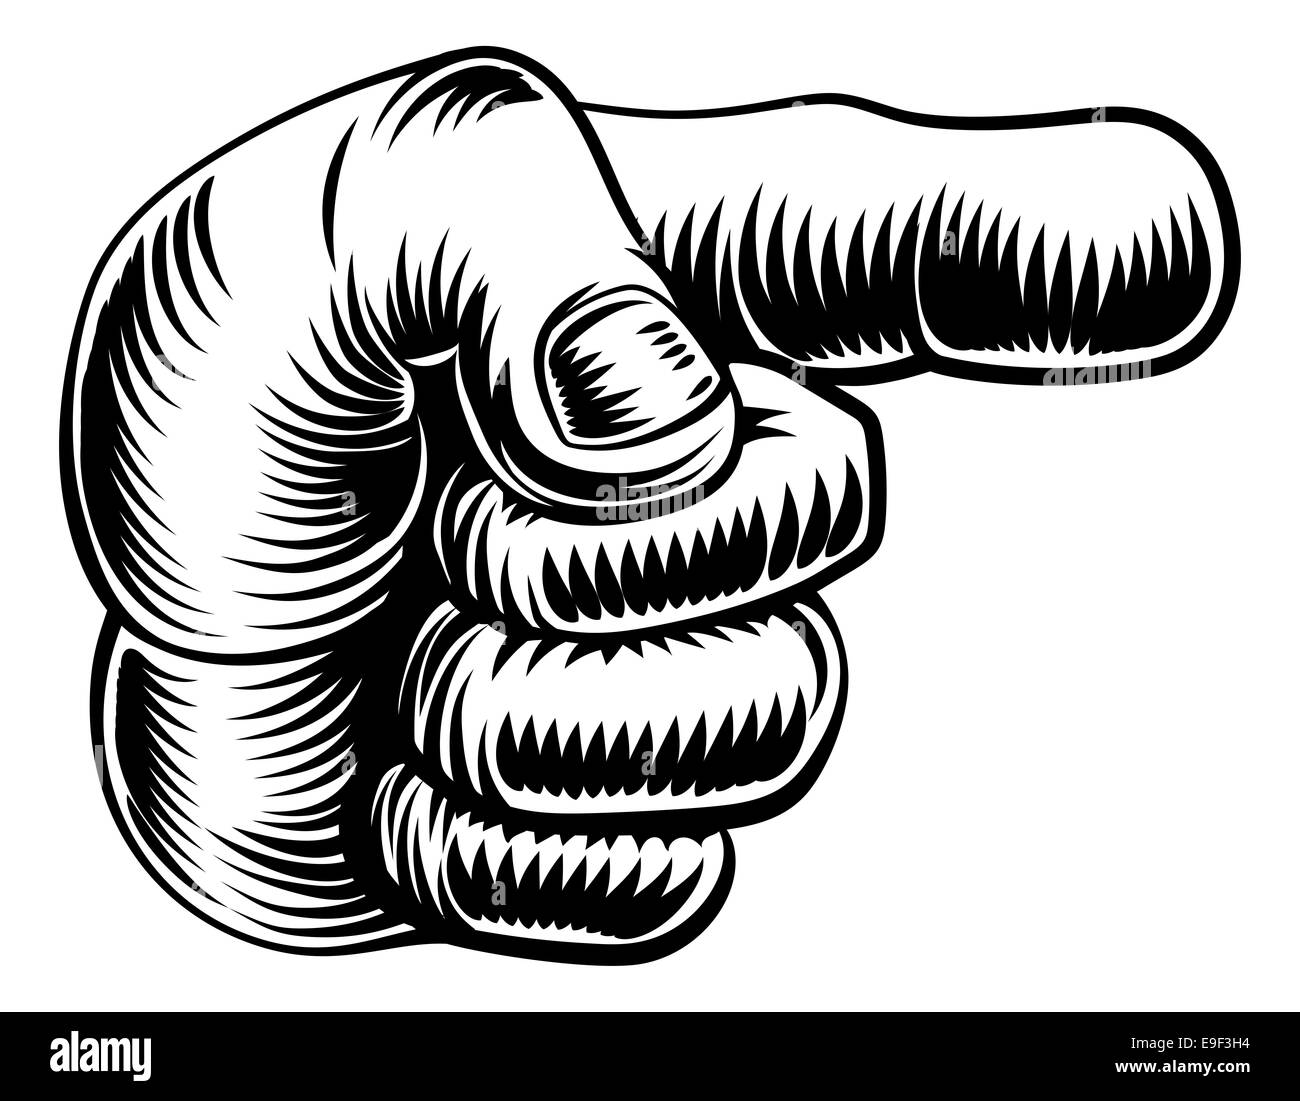 A an original illustration of a vintage woodcut style hand icon pointing Stock Photo